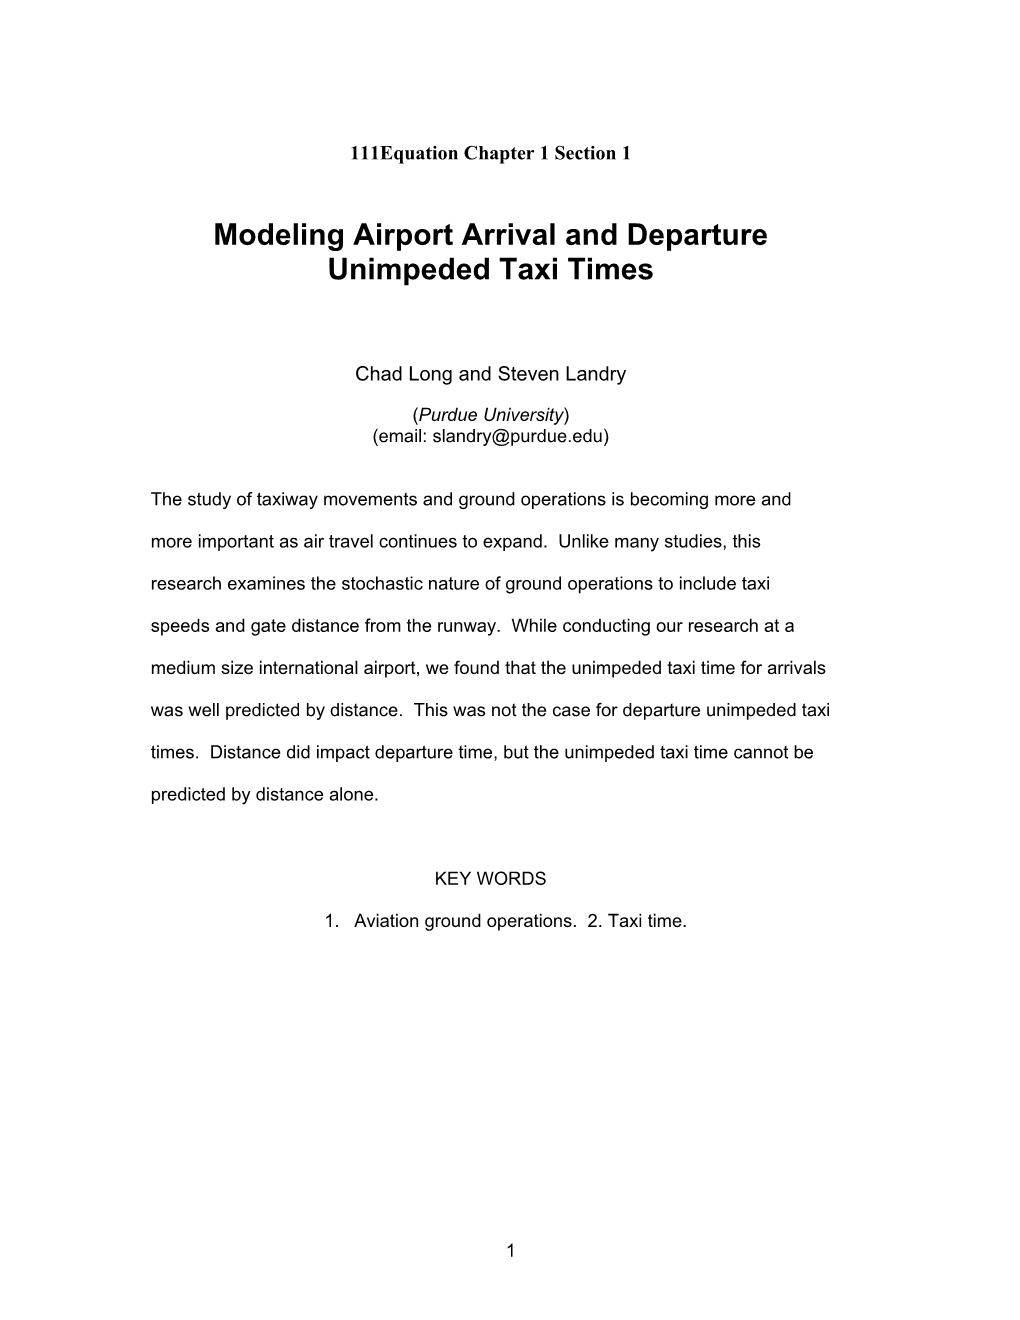 Modelingairport Arrival and Departureunimpeded Taxi Times